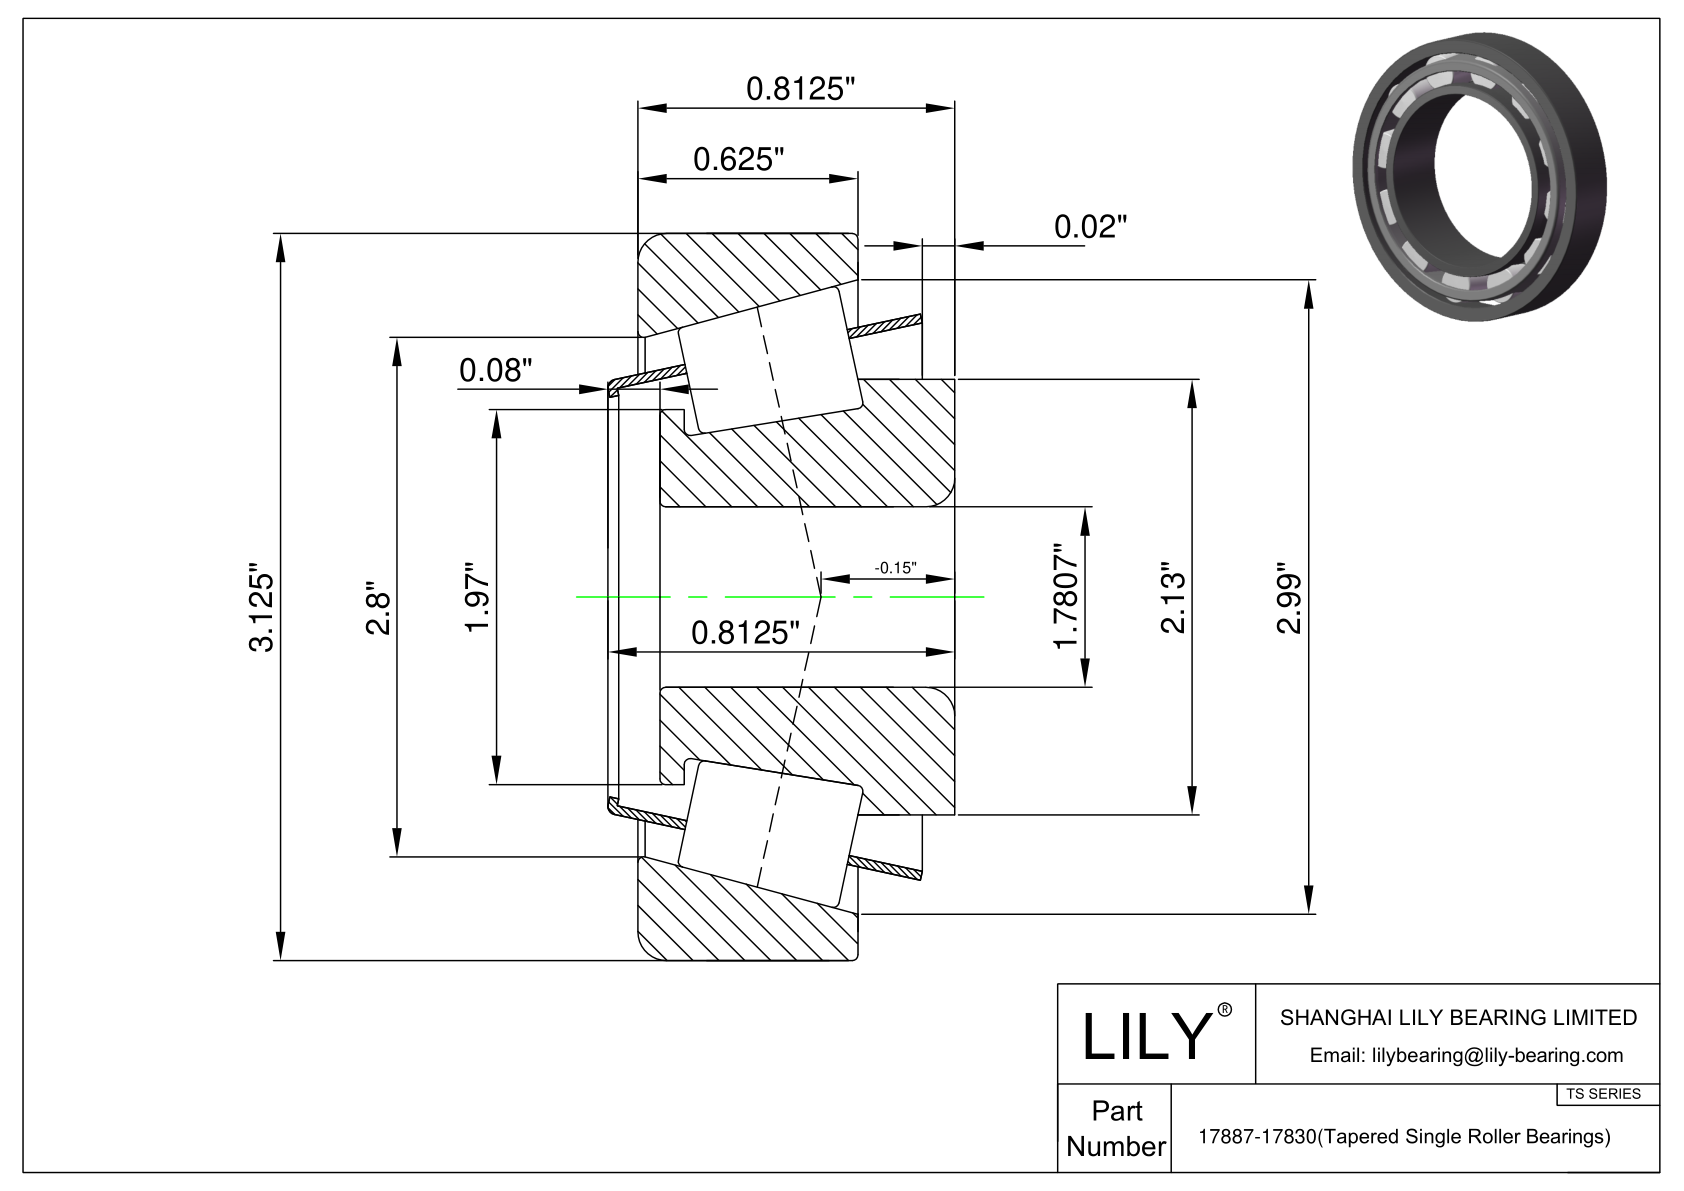 17887-17830 TS (Tapered Single Roller Bearings) (Imperial) cad drawing